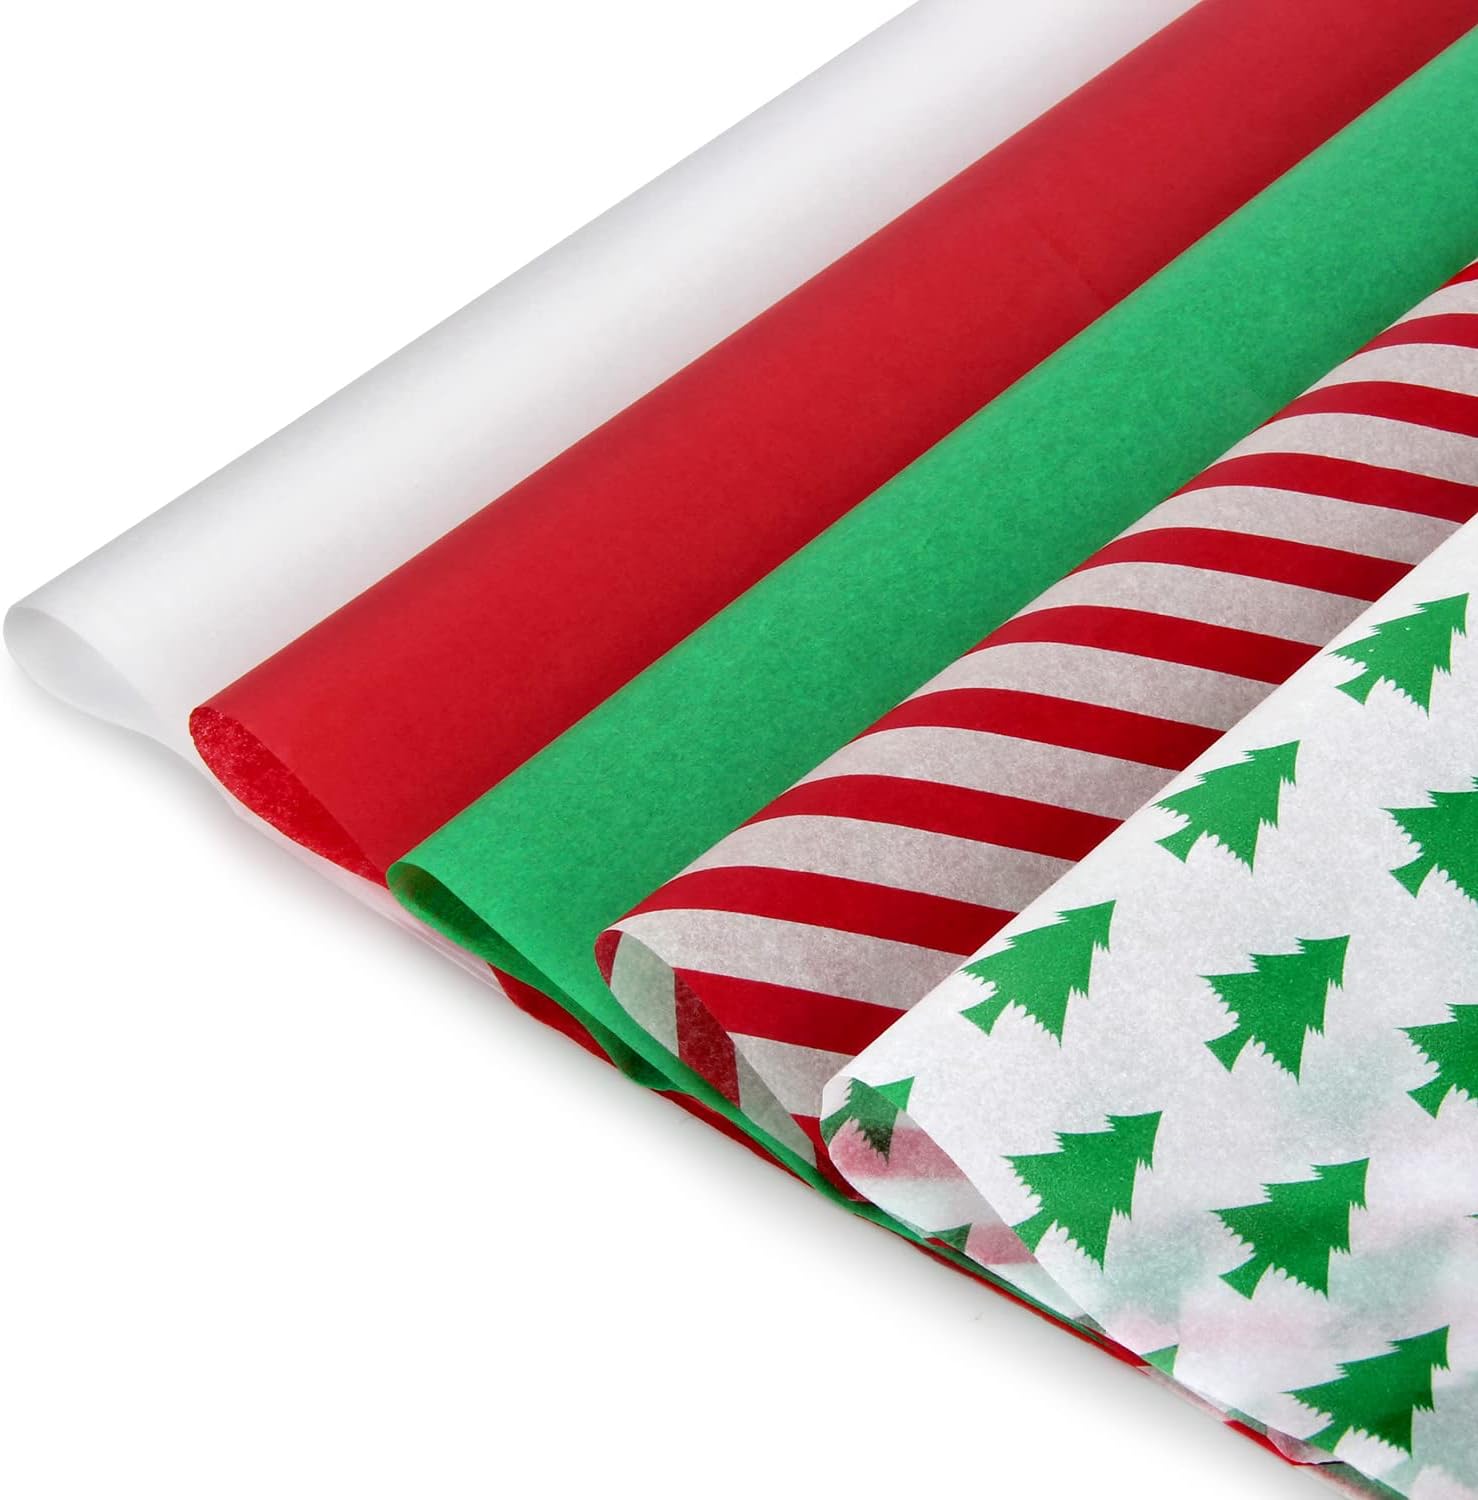 Blisstime Christmas Tissue Paper Gift Wrapping Paper, 120 Sheets, 13.5 X 19.5, White, Red, Green, Red Stripe, Christmas Trees Design